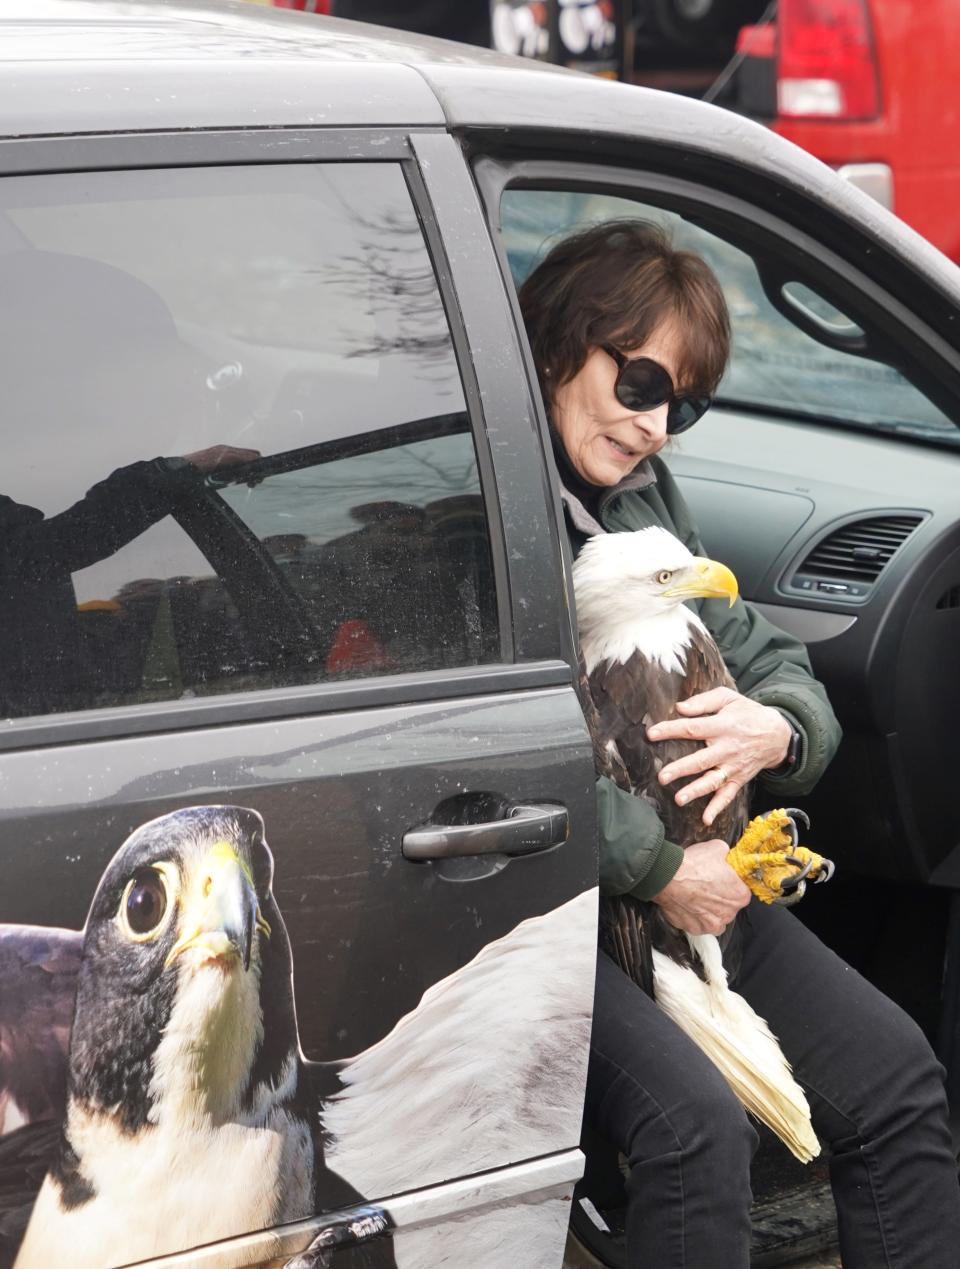 Marge Gibson, executive director of Raptor Education Group, Inc. (REGI) of Antigo, arrives Jan. 6, 2023 carrying a bald eagle destined to be released at Prairie du Sac. The eagles had been rehabilitated from injuries or illnesses at REGI.